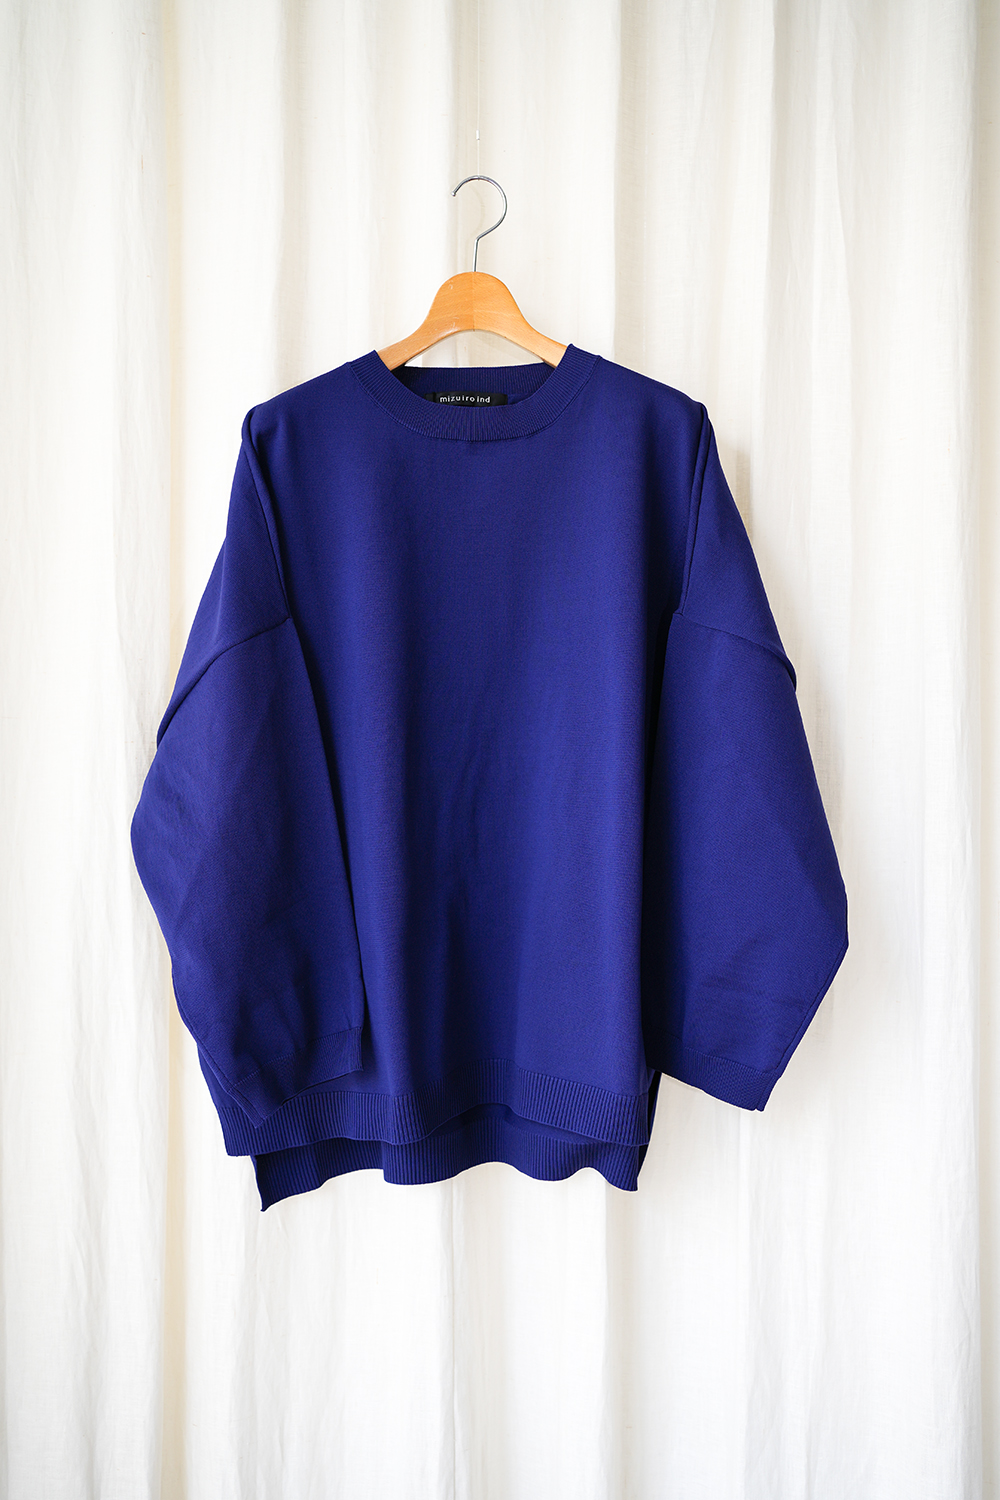 crewneck wide knitted PO